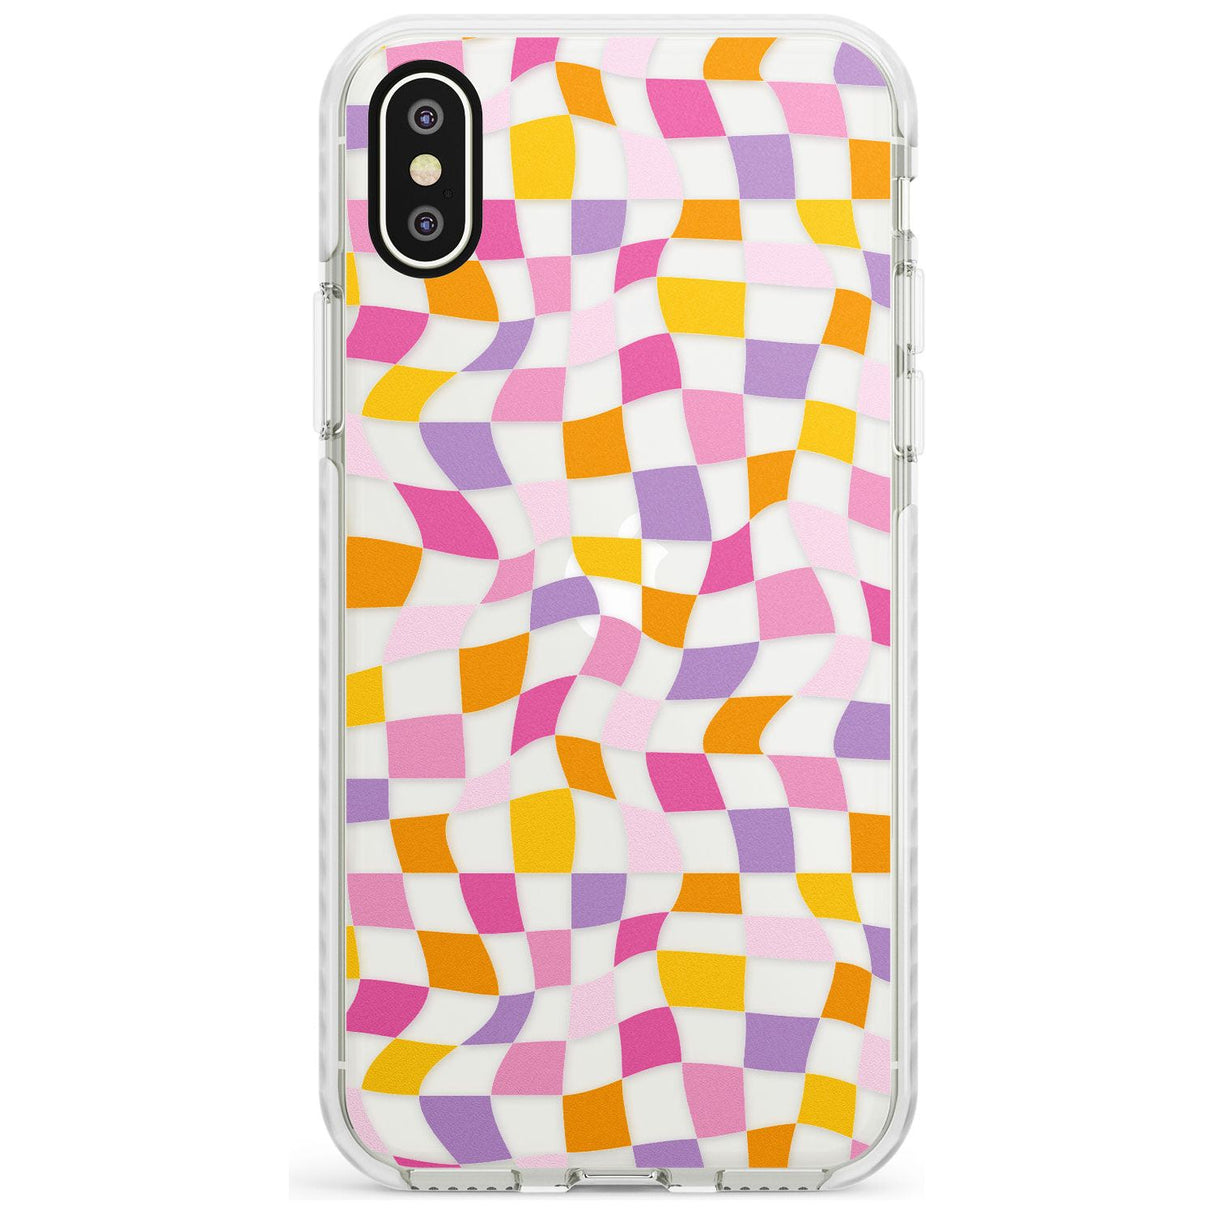 Wonky Squares Pattern Impact Phone Case for iPhone X XS Max XR